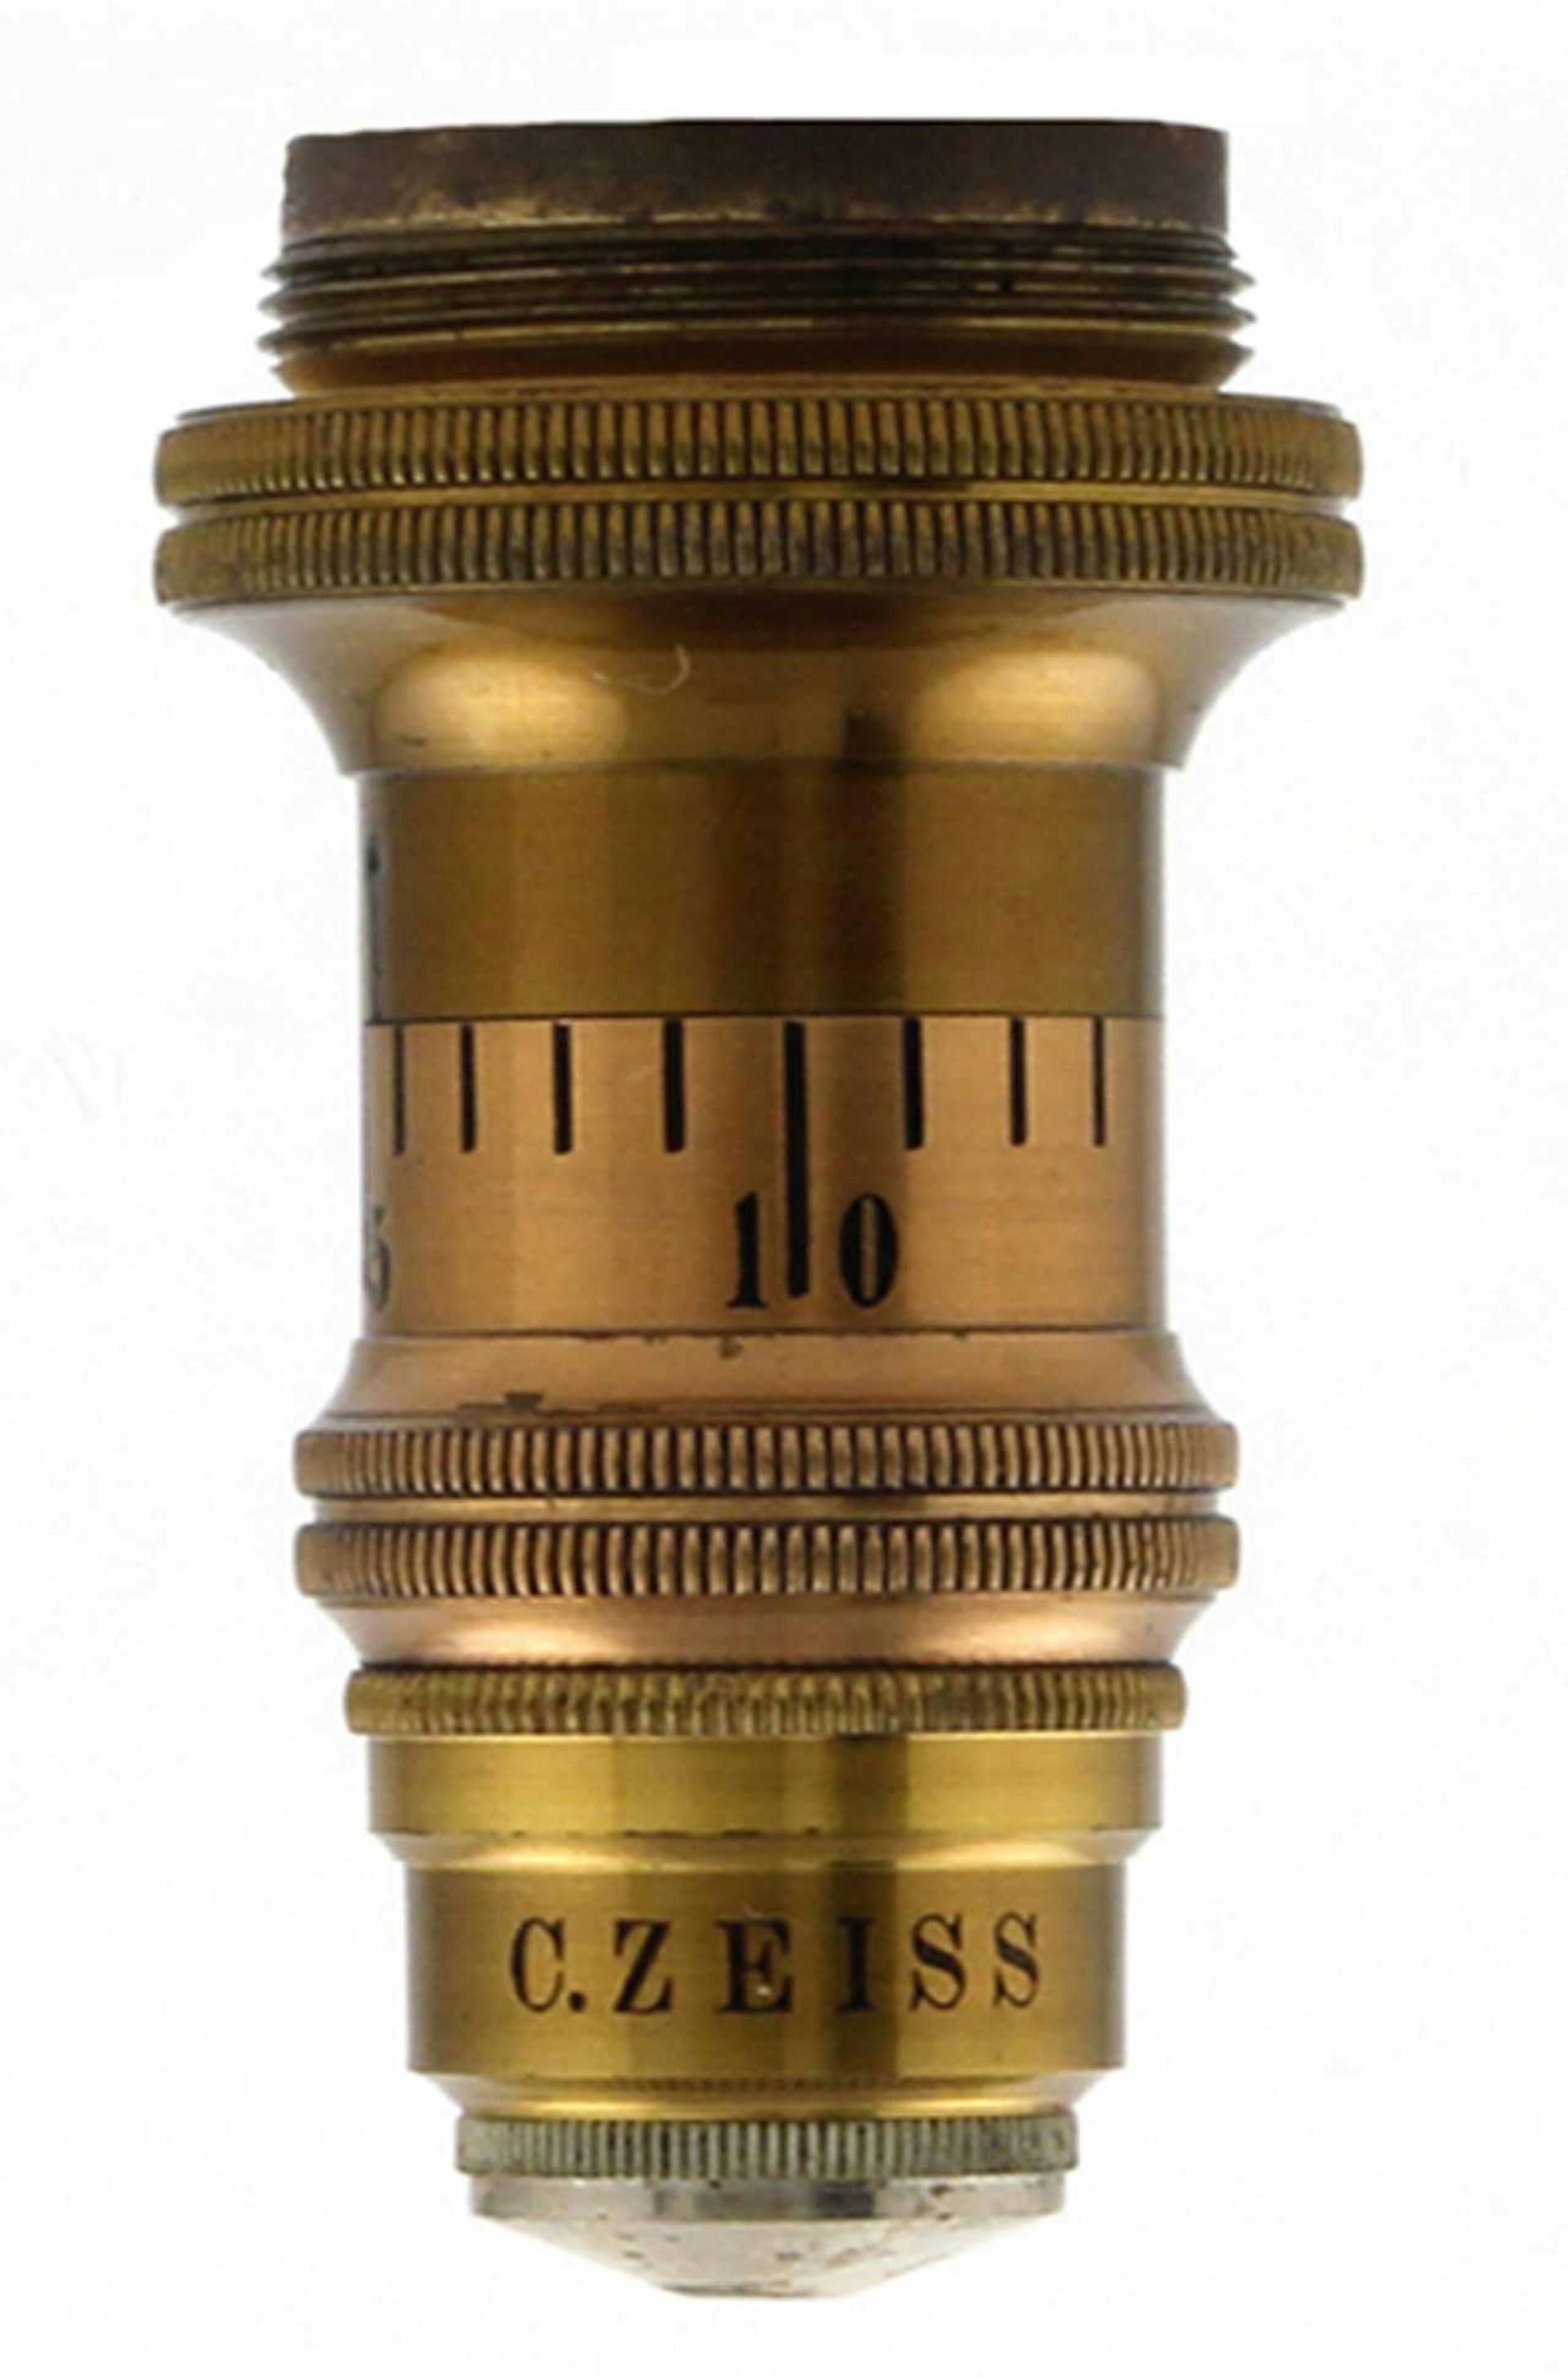 Immersion objective lens K from 1881 (Photo: Timo Mappes)